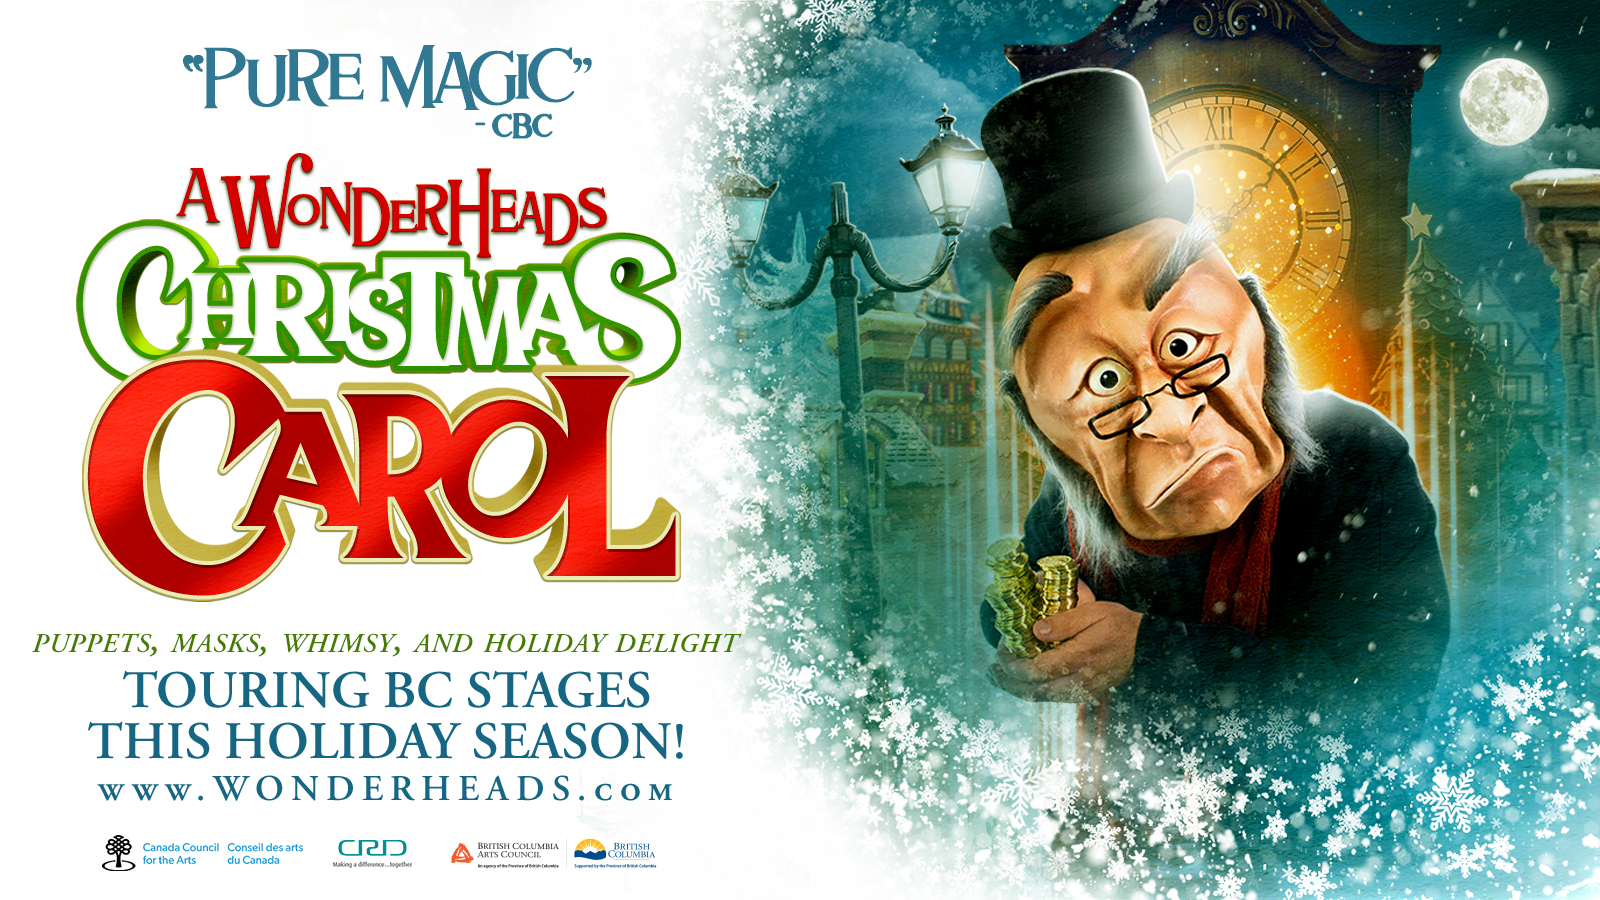 A WONDERHEADS Christmas Carol - New Westminster, New Westminster, British Columbia, Canada